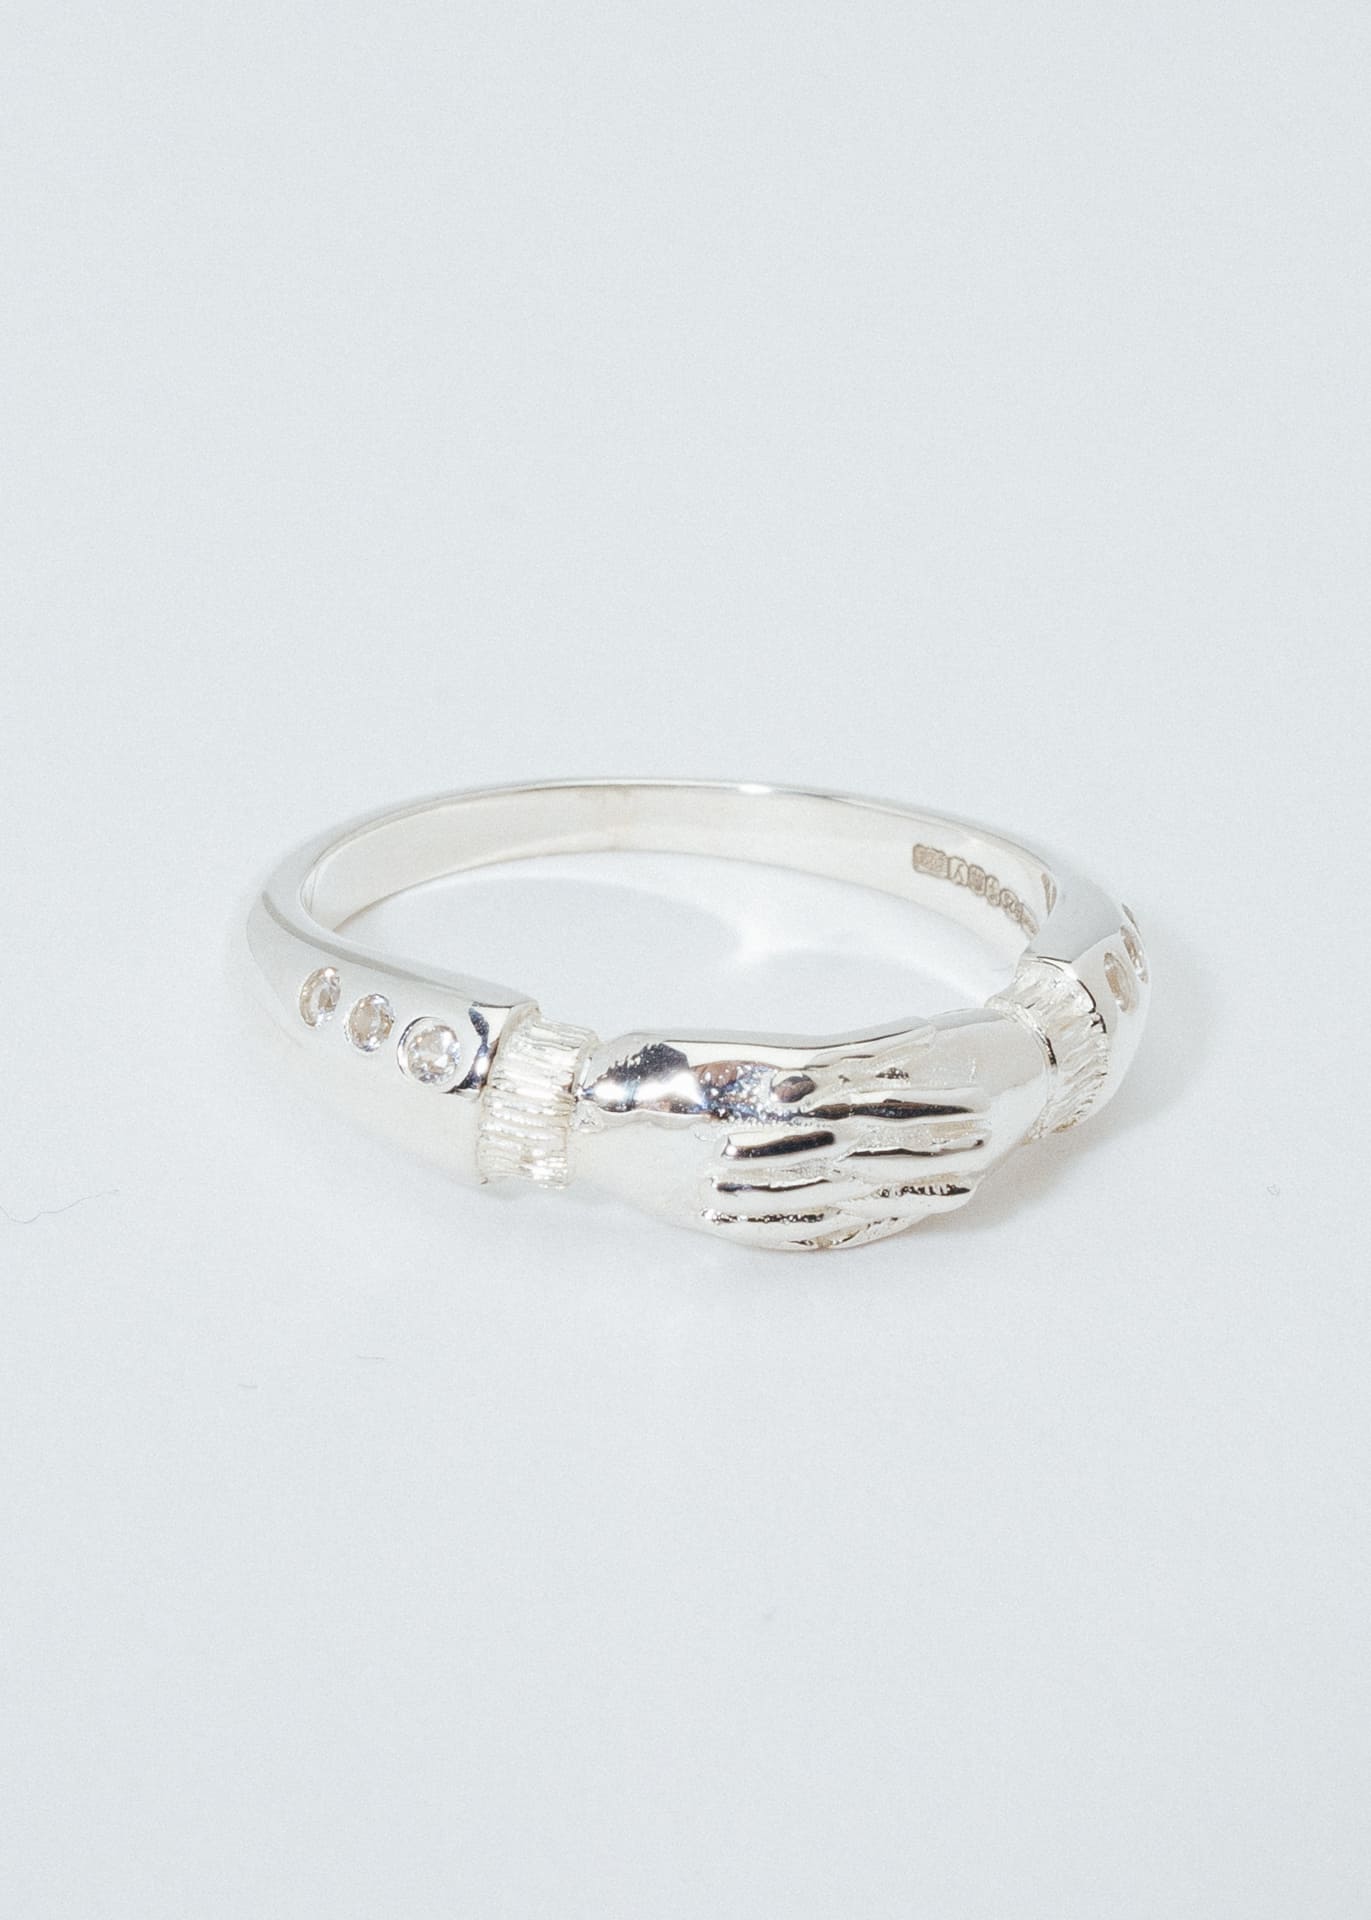 B213_Hands Of Thought Ring_L_04